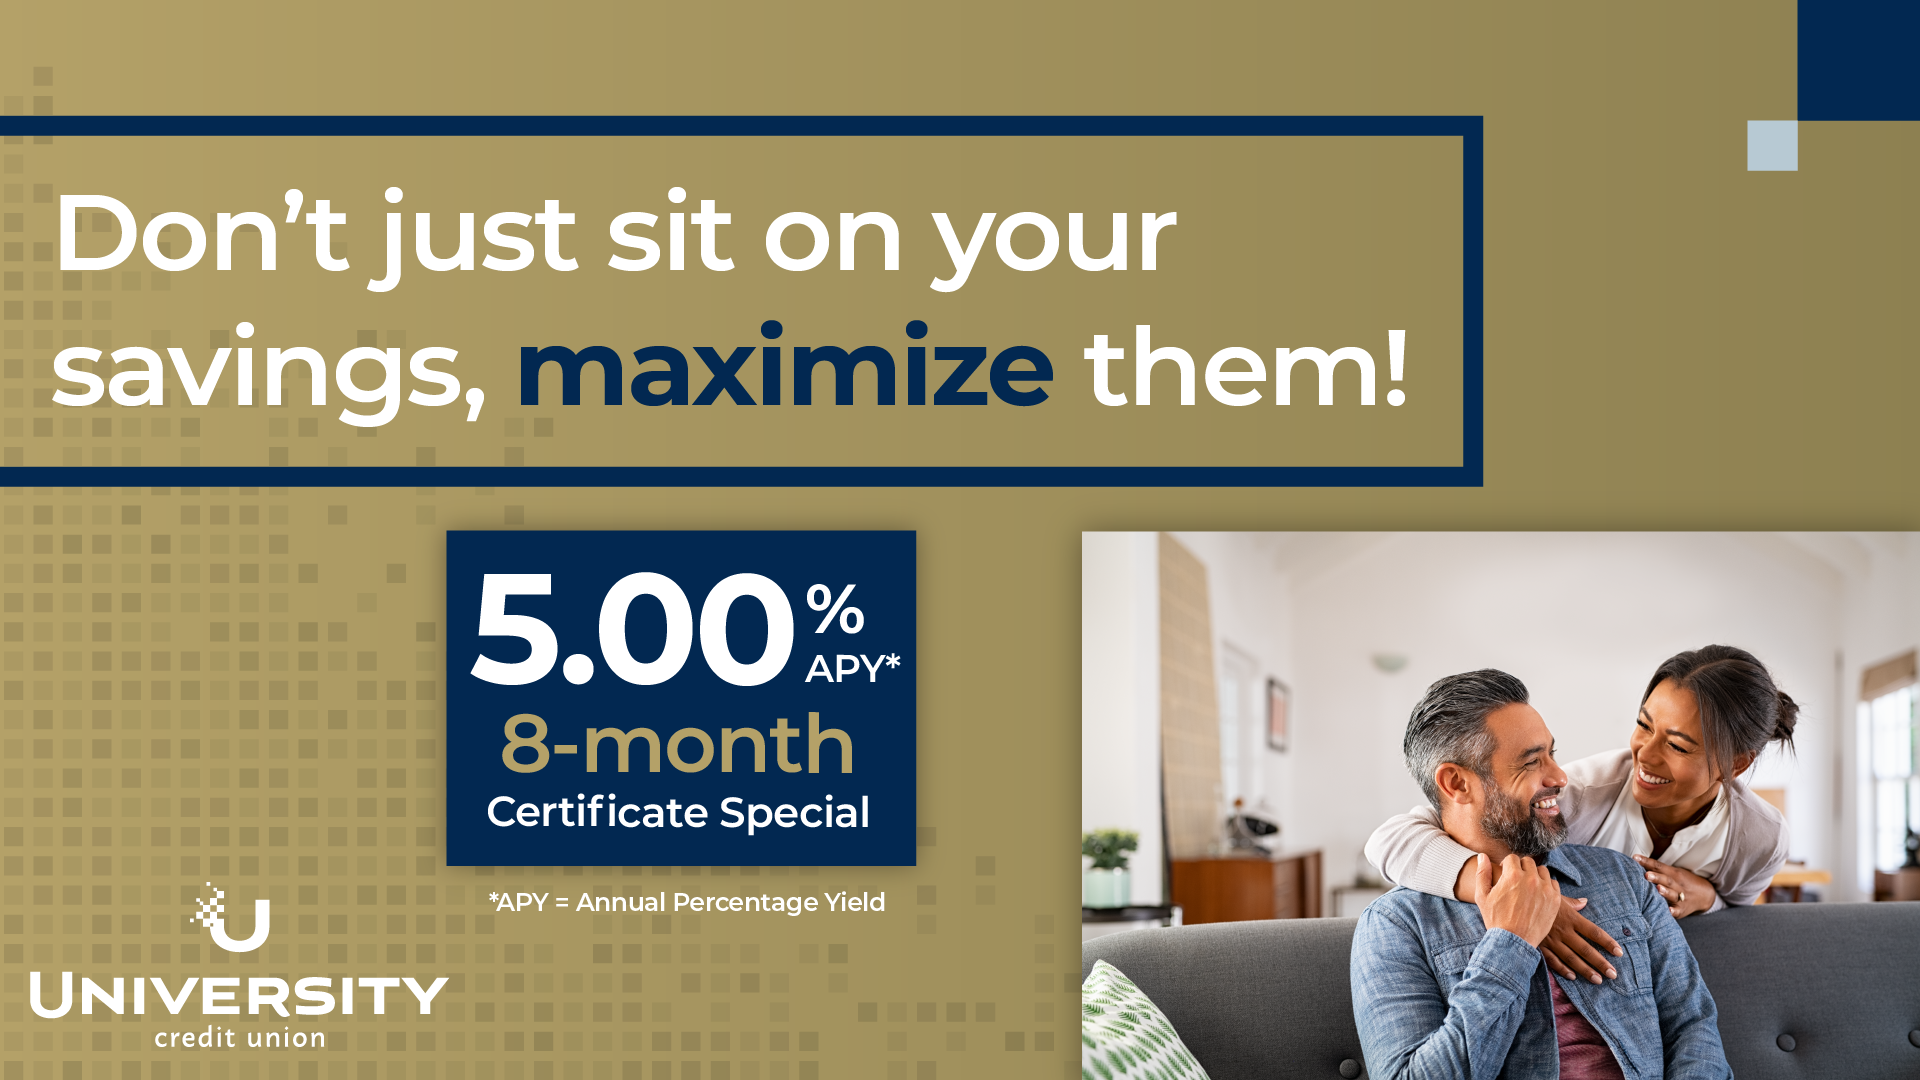 Light gold background with a navy border around text that erads "Don't just sit on your savings, maximize them!" and a blue box with text "5.00% APY* 8-month Certificate Special". There is a University Credit Union logo on the bottom left and a photo of a couple where an older male is seated on the couch and the partner is embracing from behind.